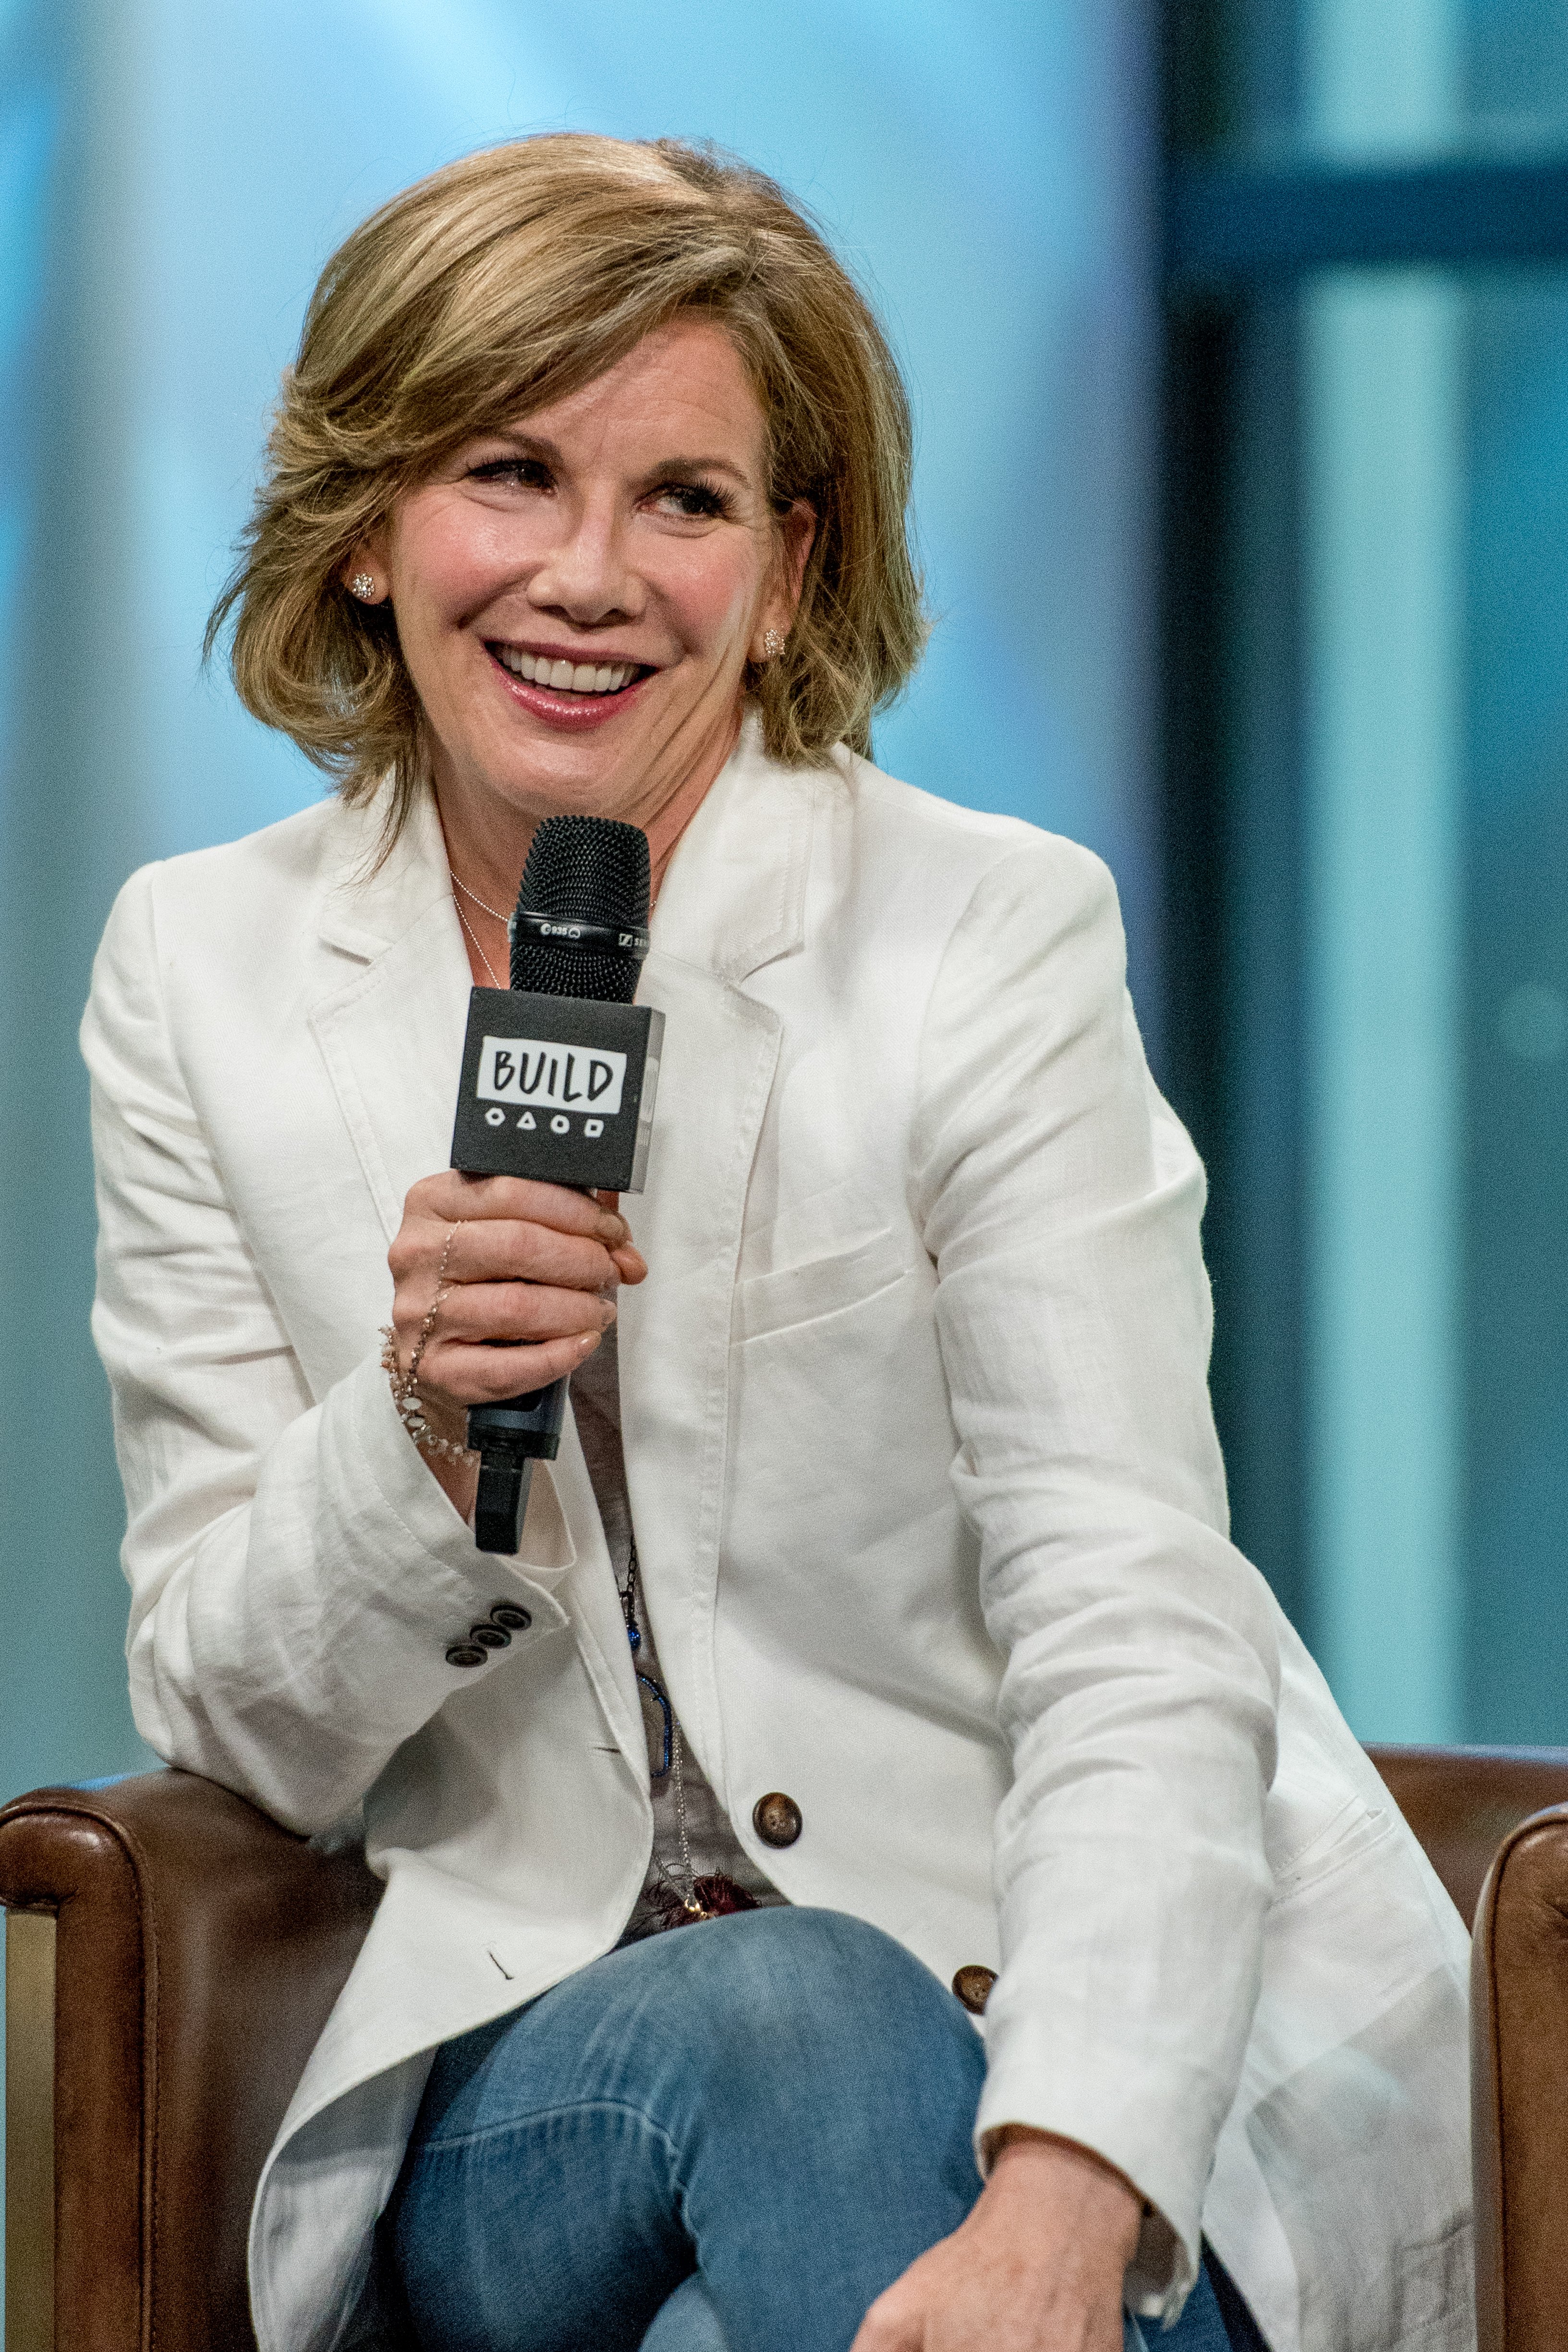 Melissa Gilbert discusses "If Only" with the BuiLd Series at Build Studio on August 14, 2017 | Photo: GettyImages